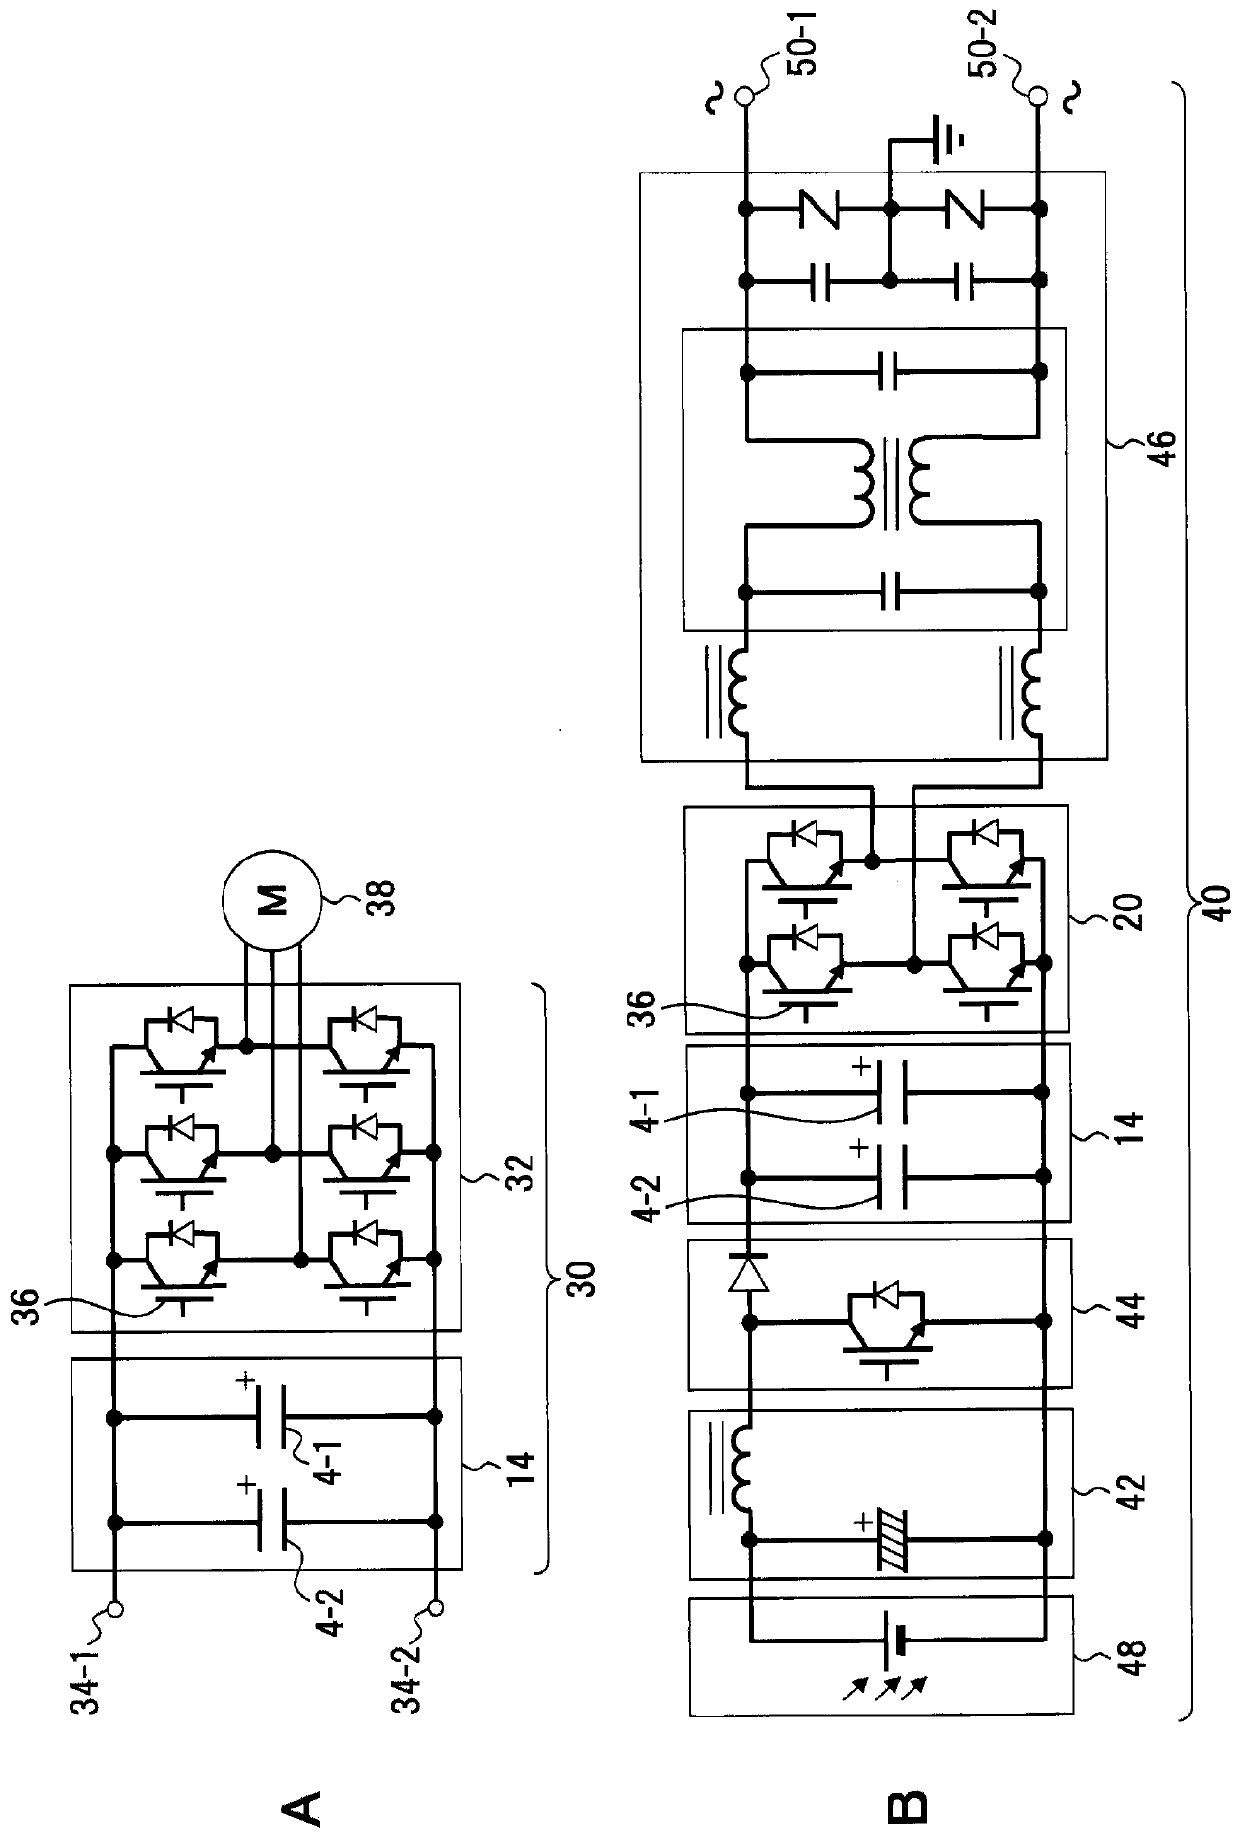 Electrolytic capacitor module, filter circuit and power converter